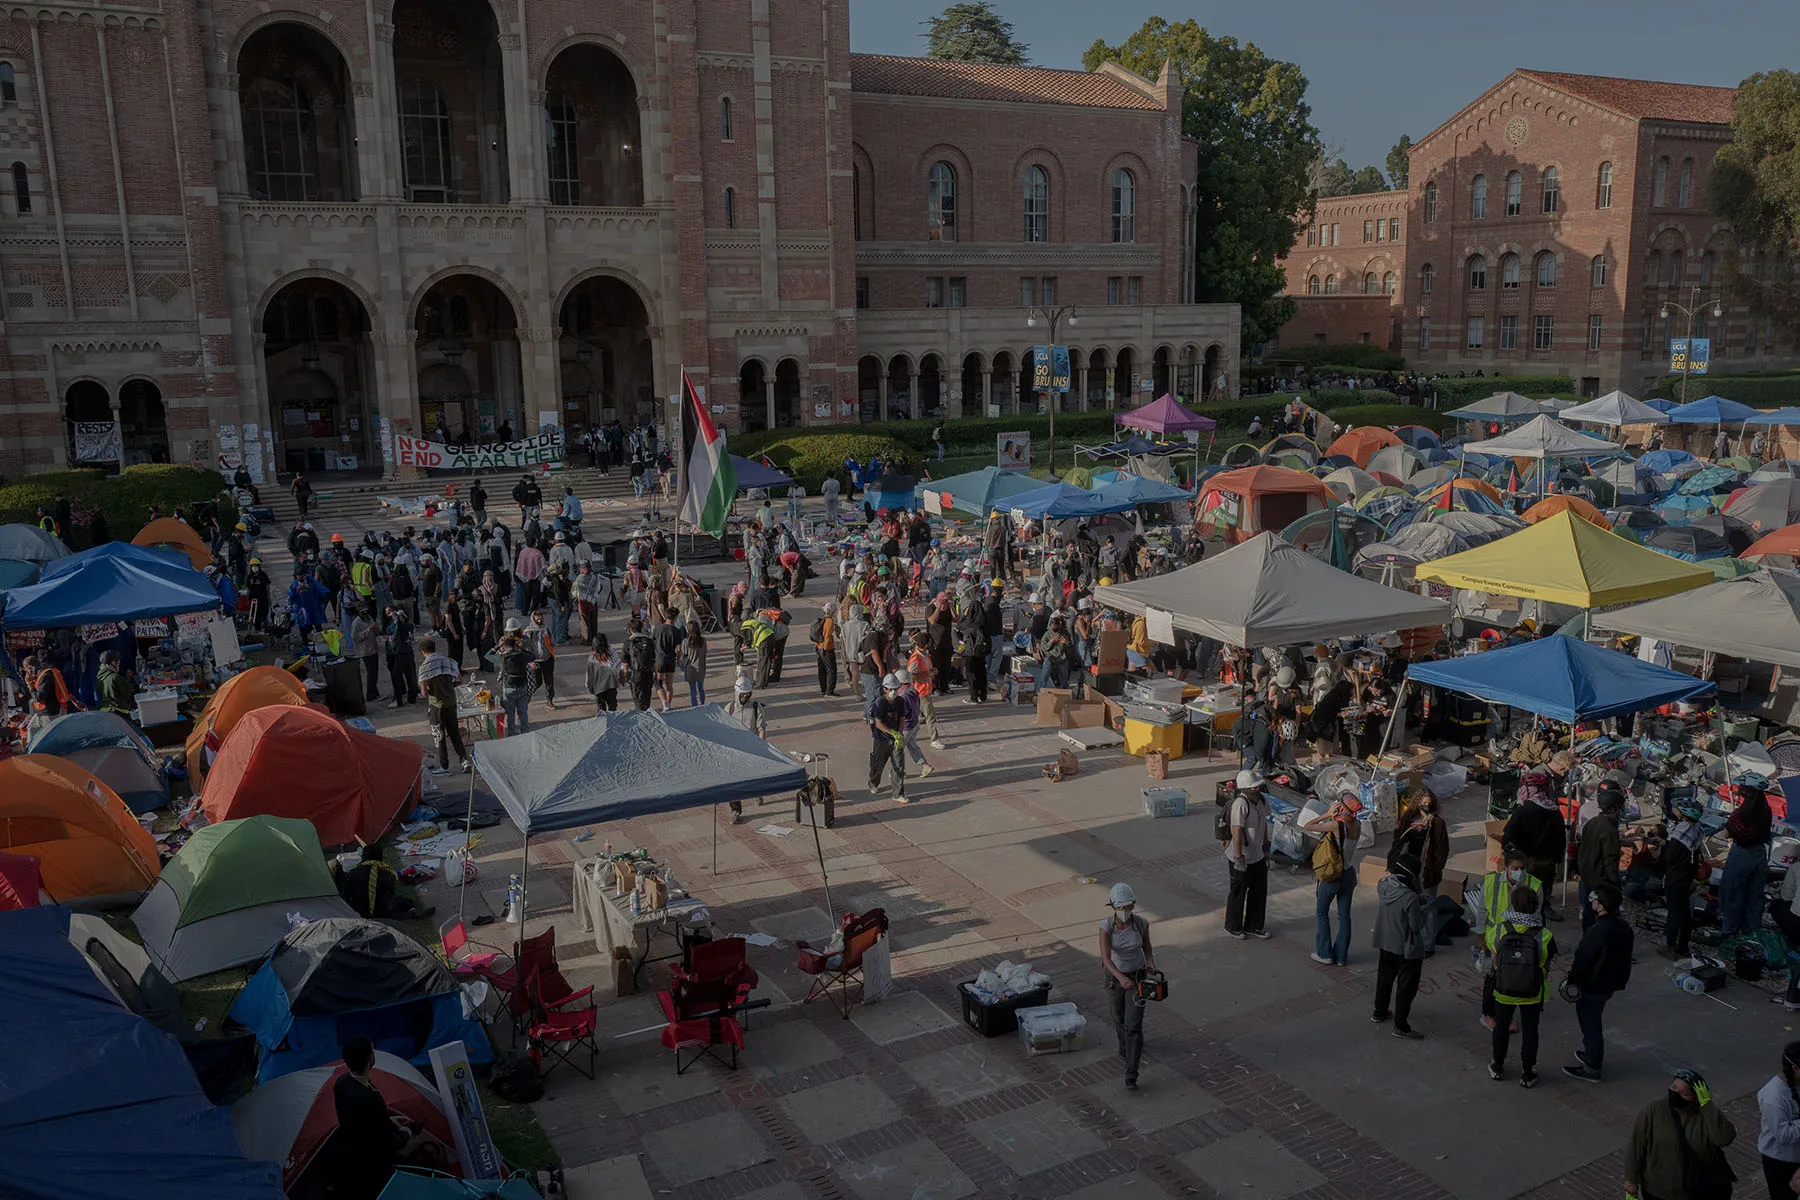 A general view of the UCLA encampment